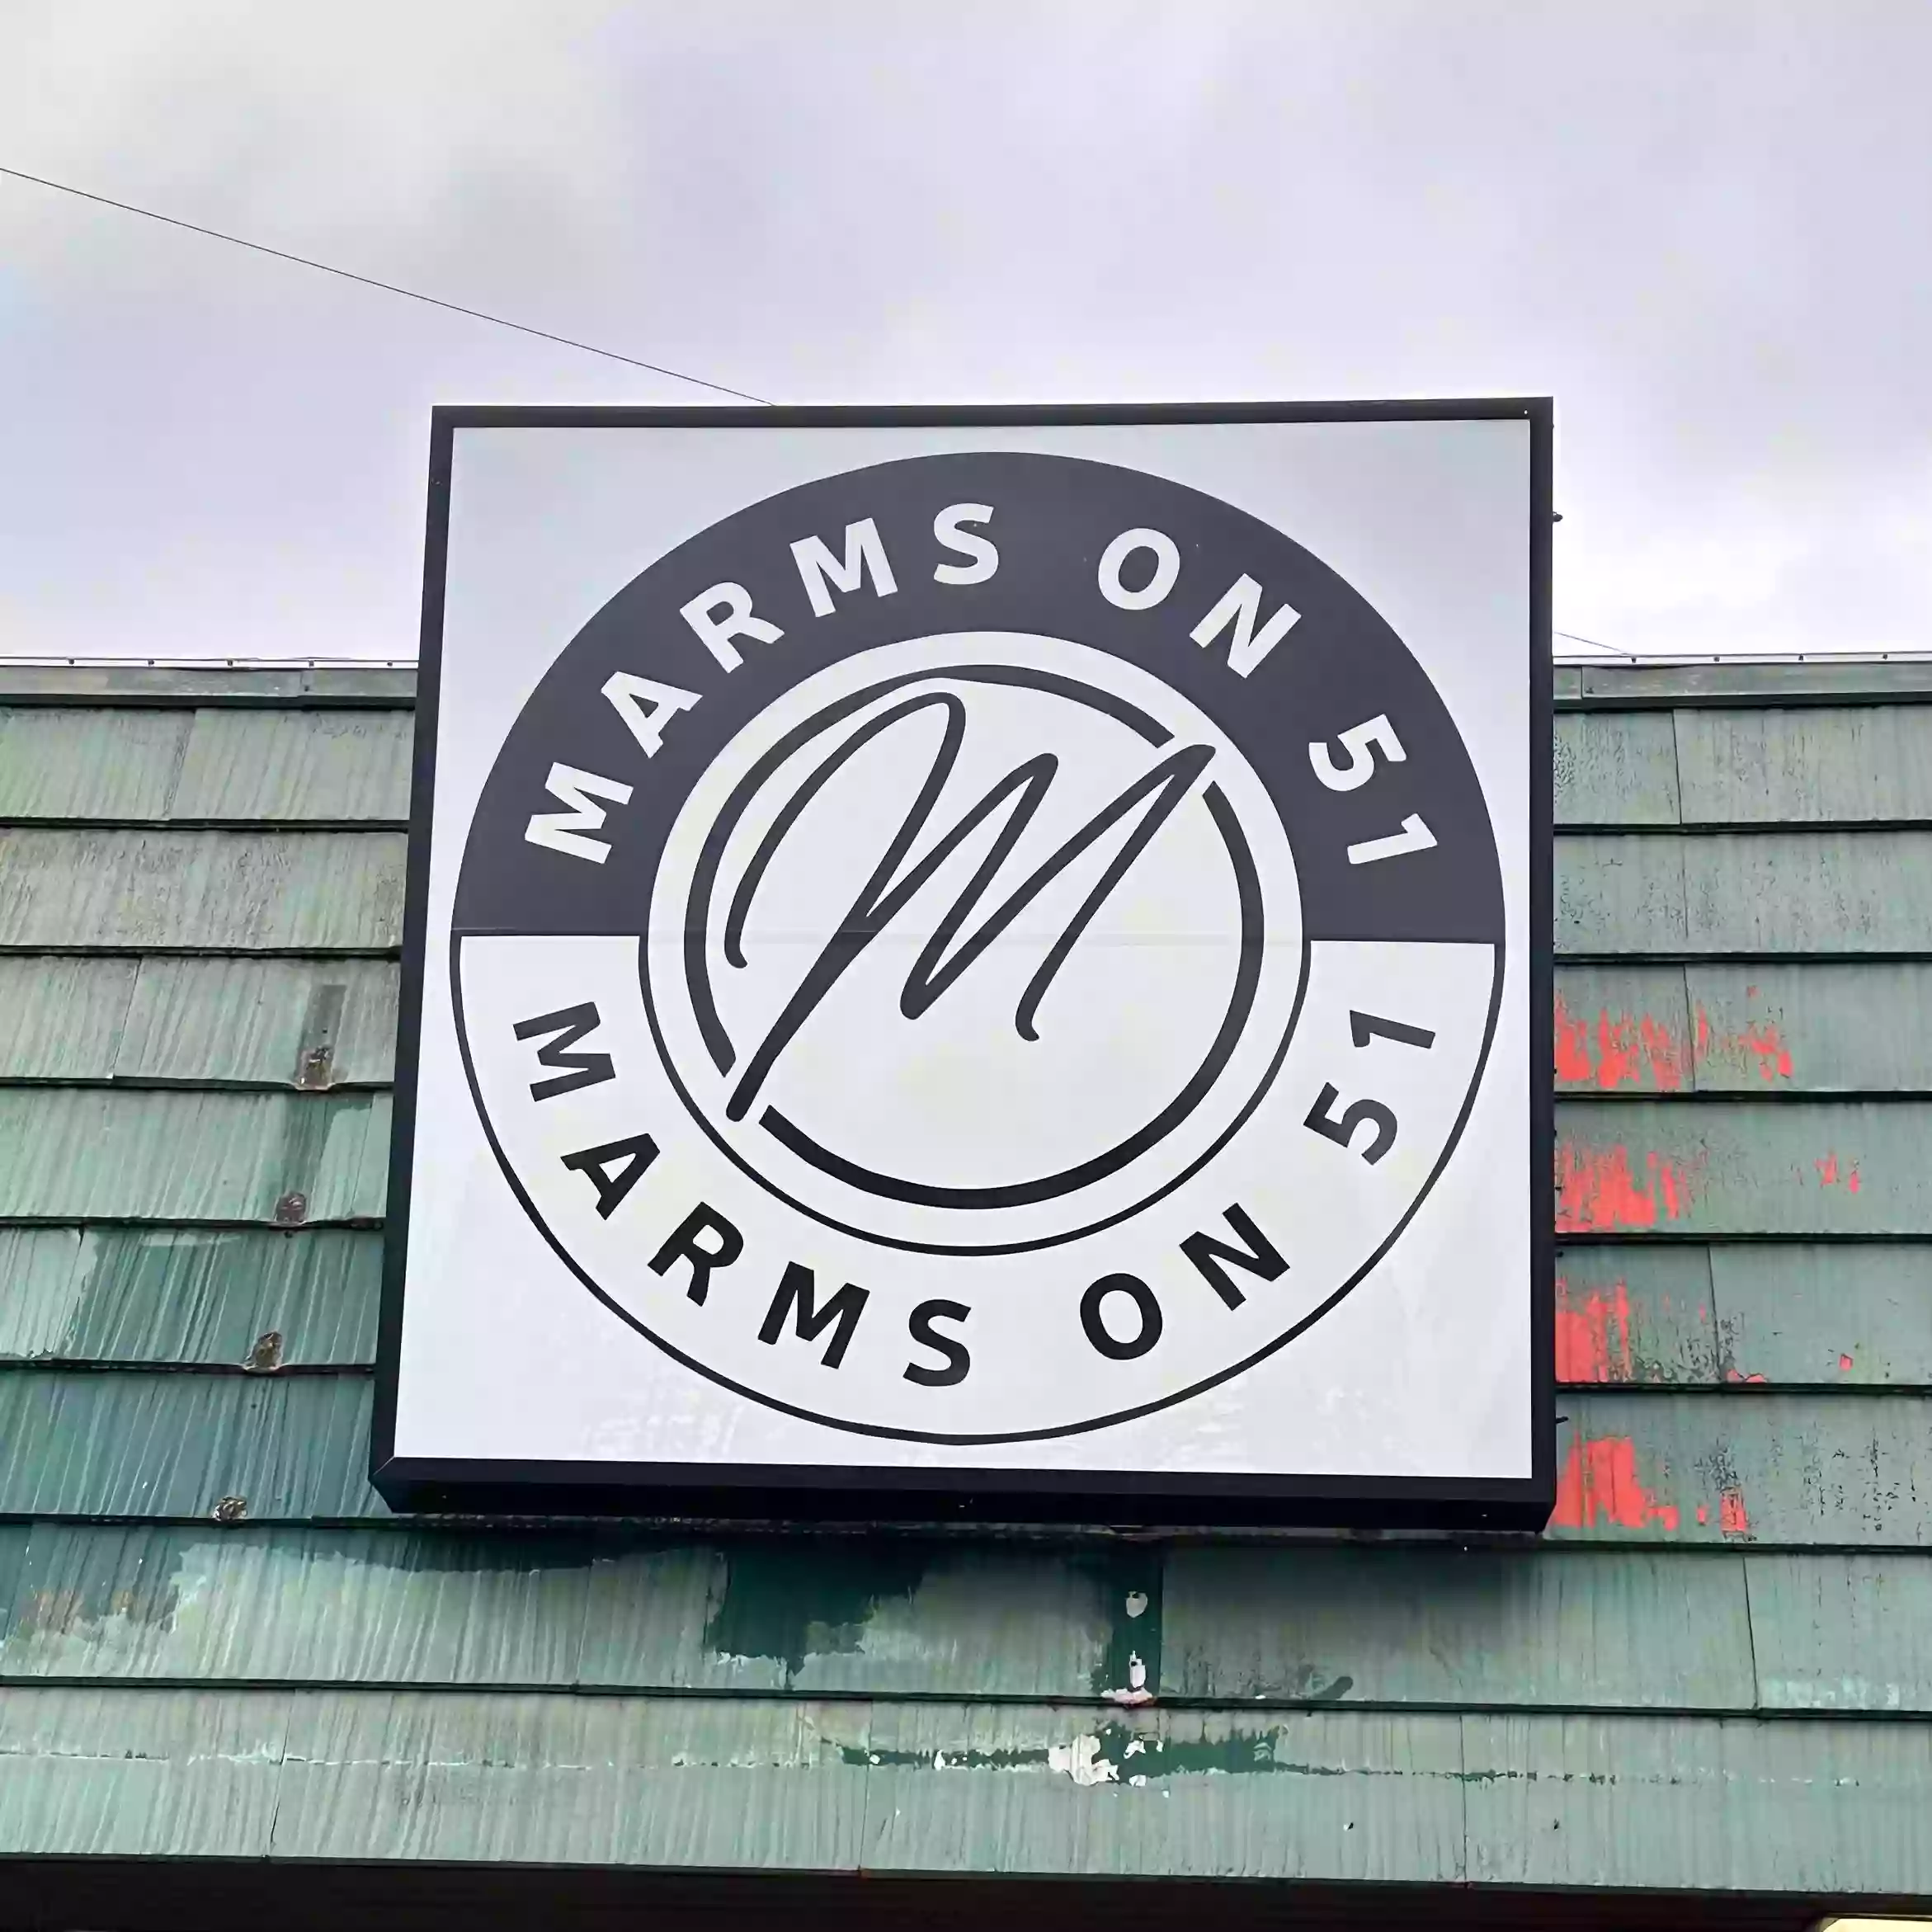 MARMS ON 51